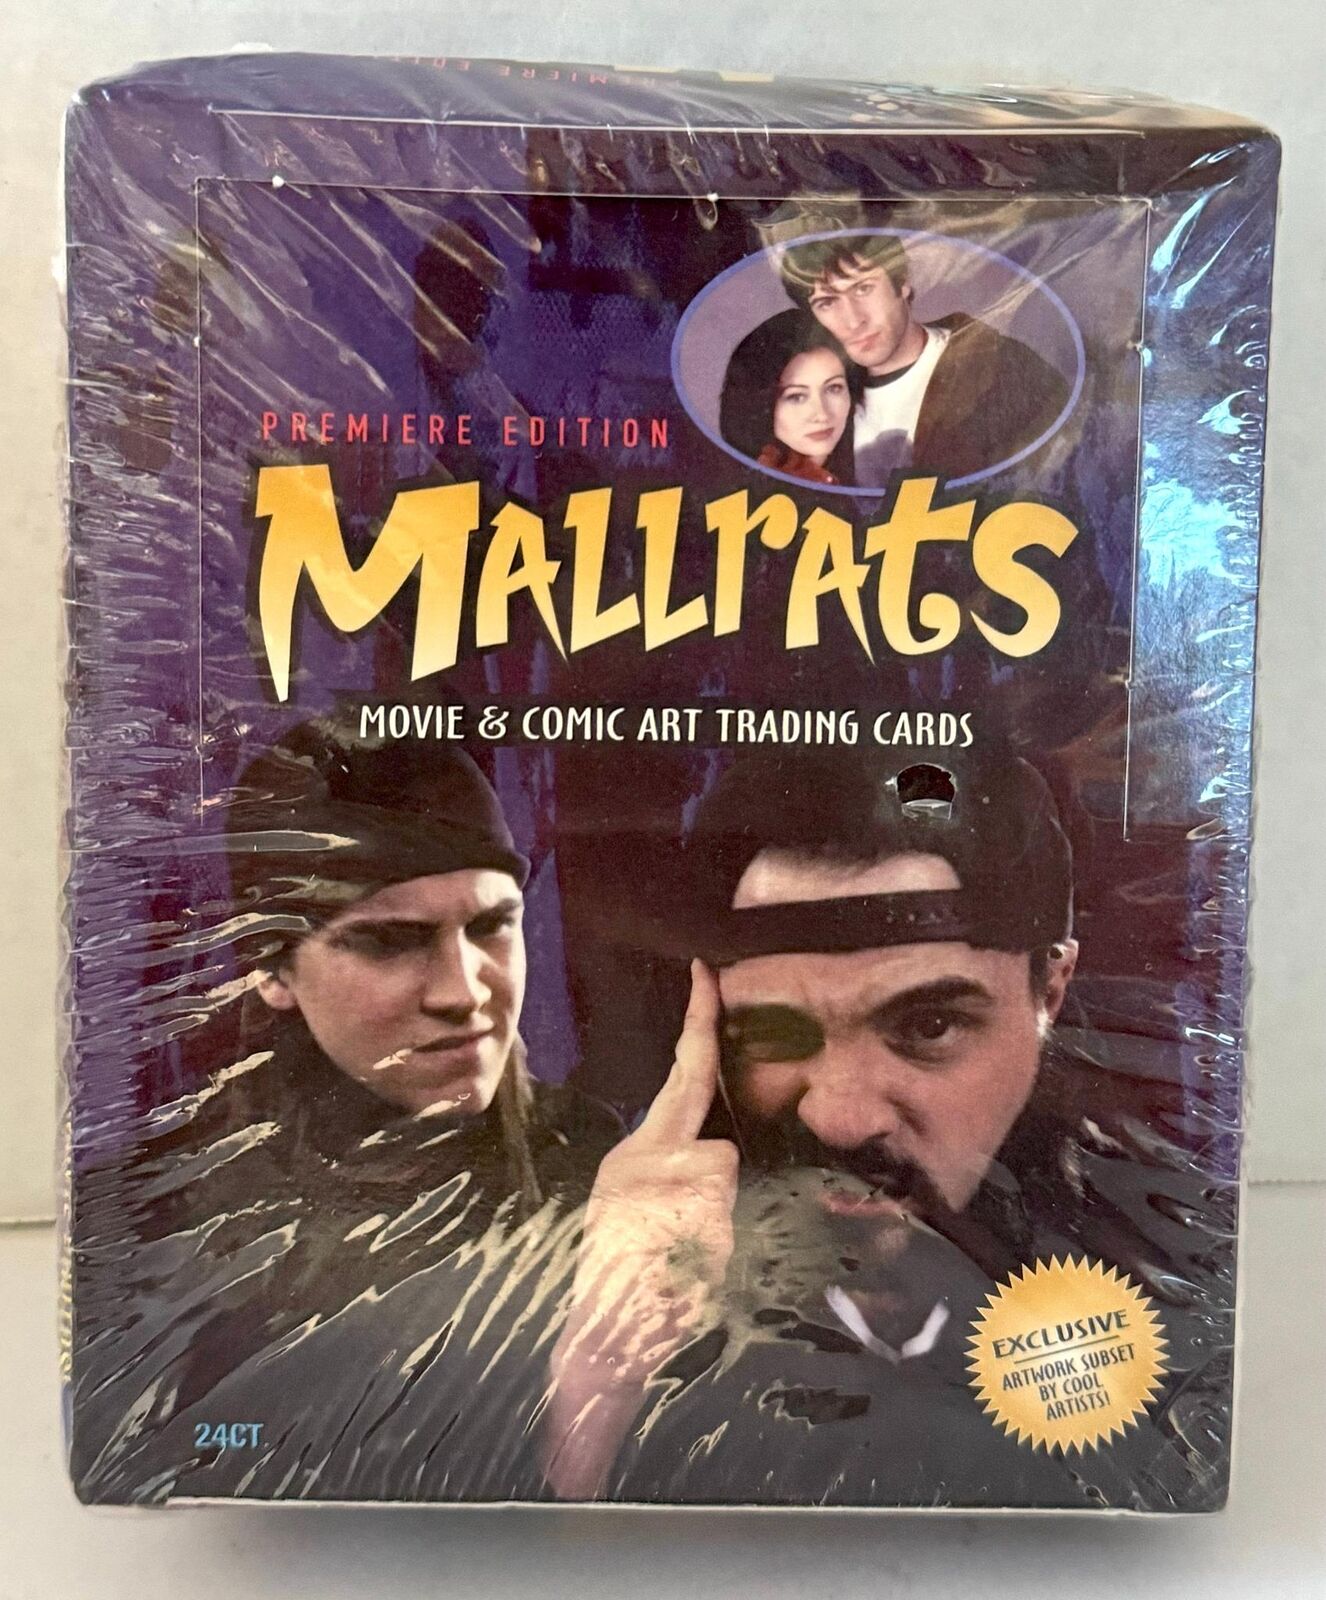 Mallrats Movie Premiere Edition Trading Card Box 24ct by Bacon & Eggs 1995